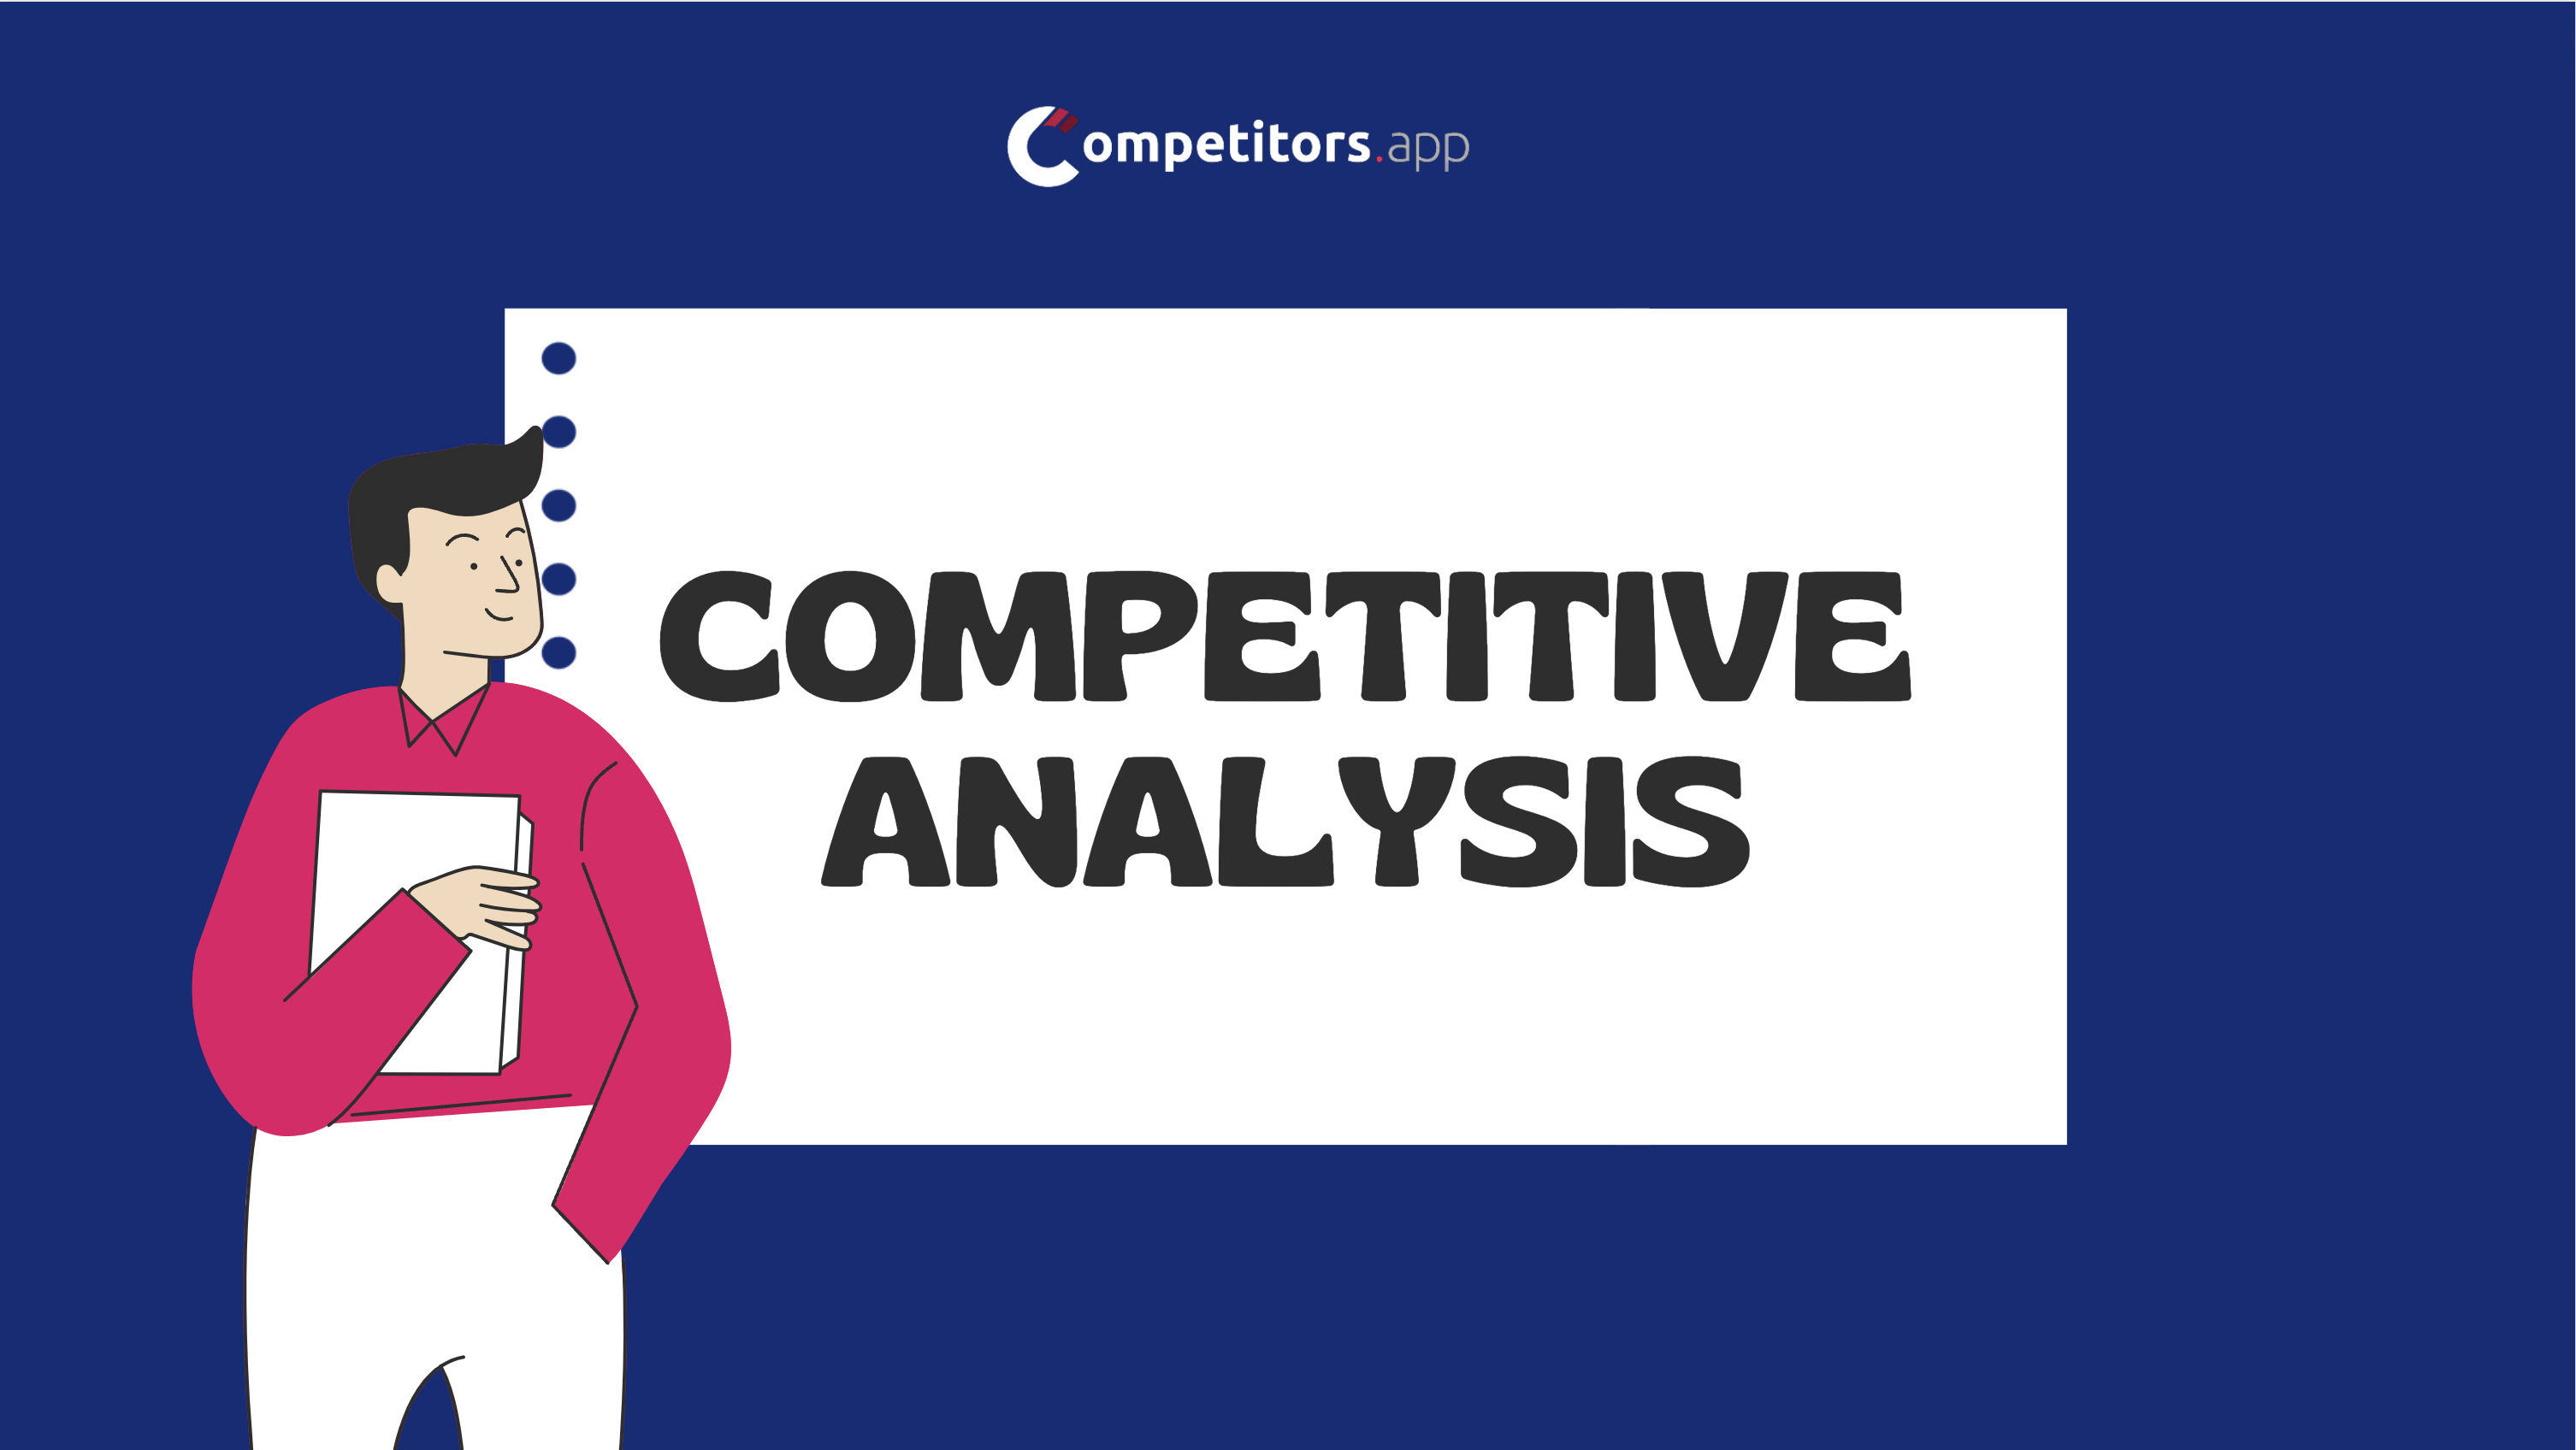 Competitor Analysis Template for Powerpoint (ppt)